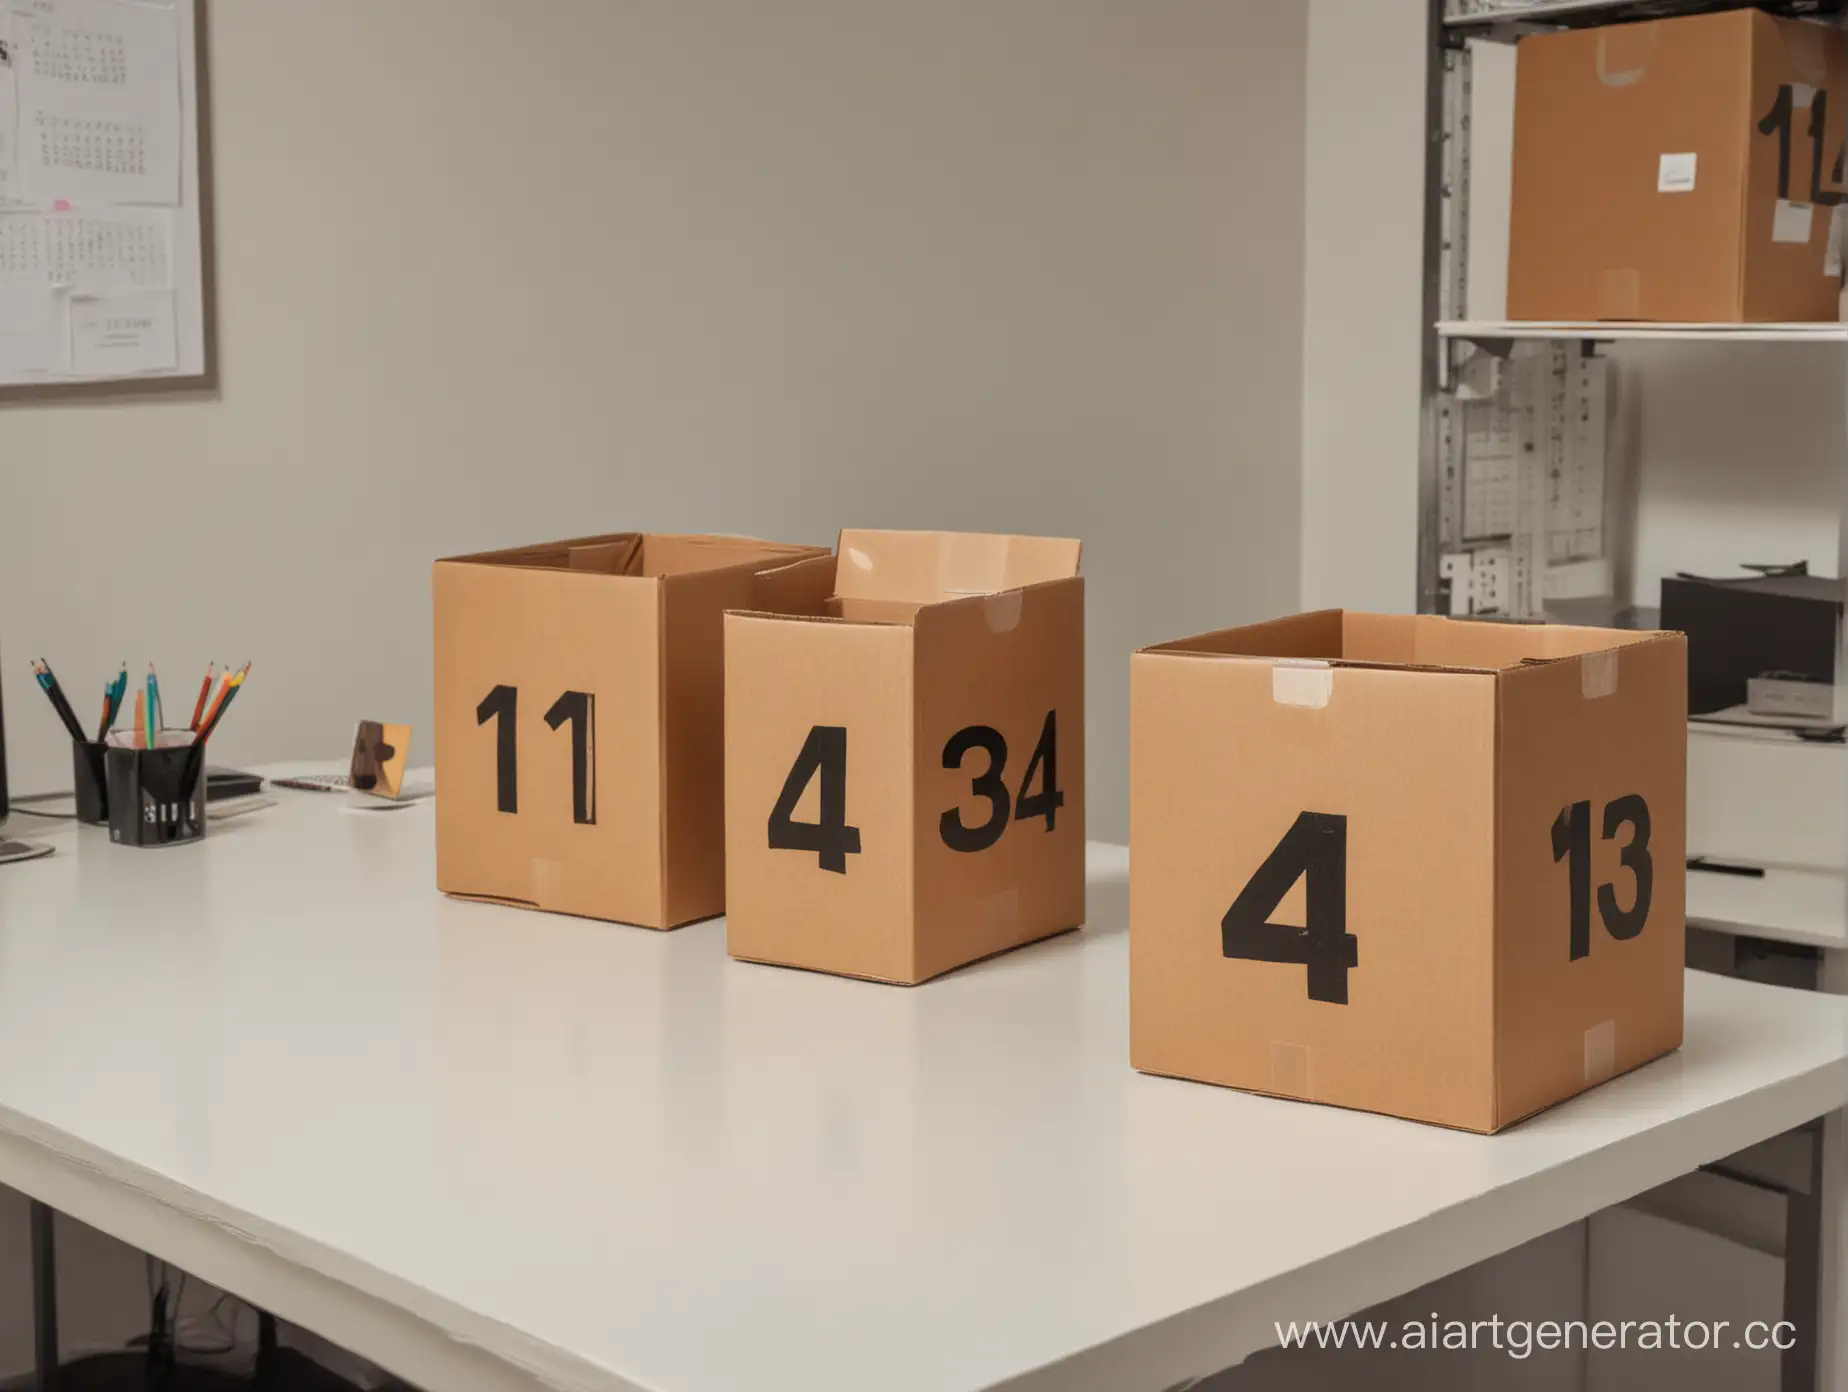 Office-Desk-with-Numbered-Cardboard-Boxes-113-and-114